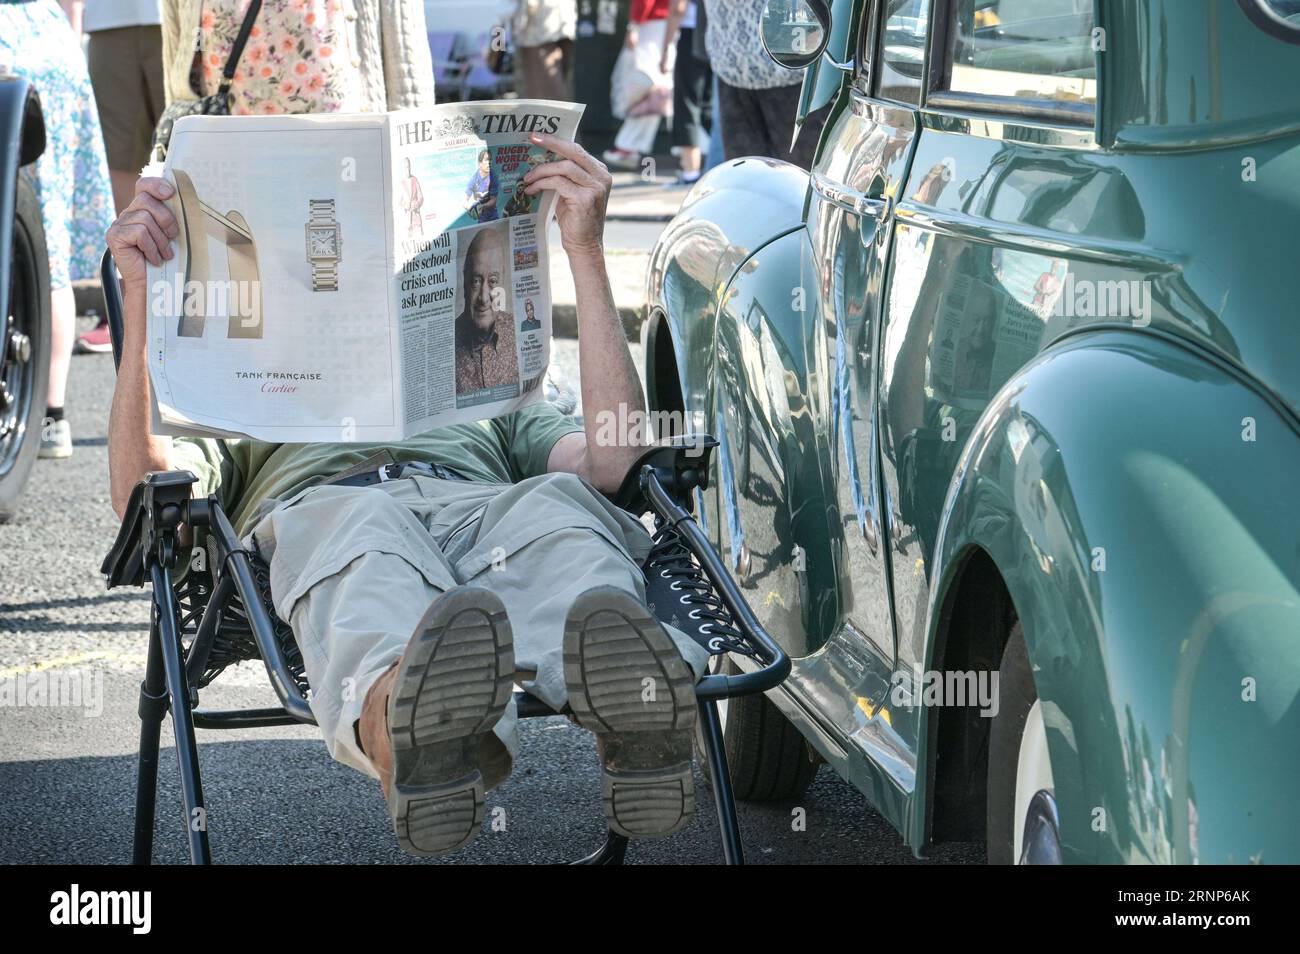 Morecambe, Lancashire - September 2nd 2023 - Visitors enjoyed Morecambe's Vintage By The Sea festival on Saturday. Many of whom came dressed in vintage clothing and soaked up the atmosphere. A man took a rest in the shade of his vintage car reading a newspaper as the blaring sun beated down. Credit: Stop Press Media/Alamy Live News Stock Photo